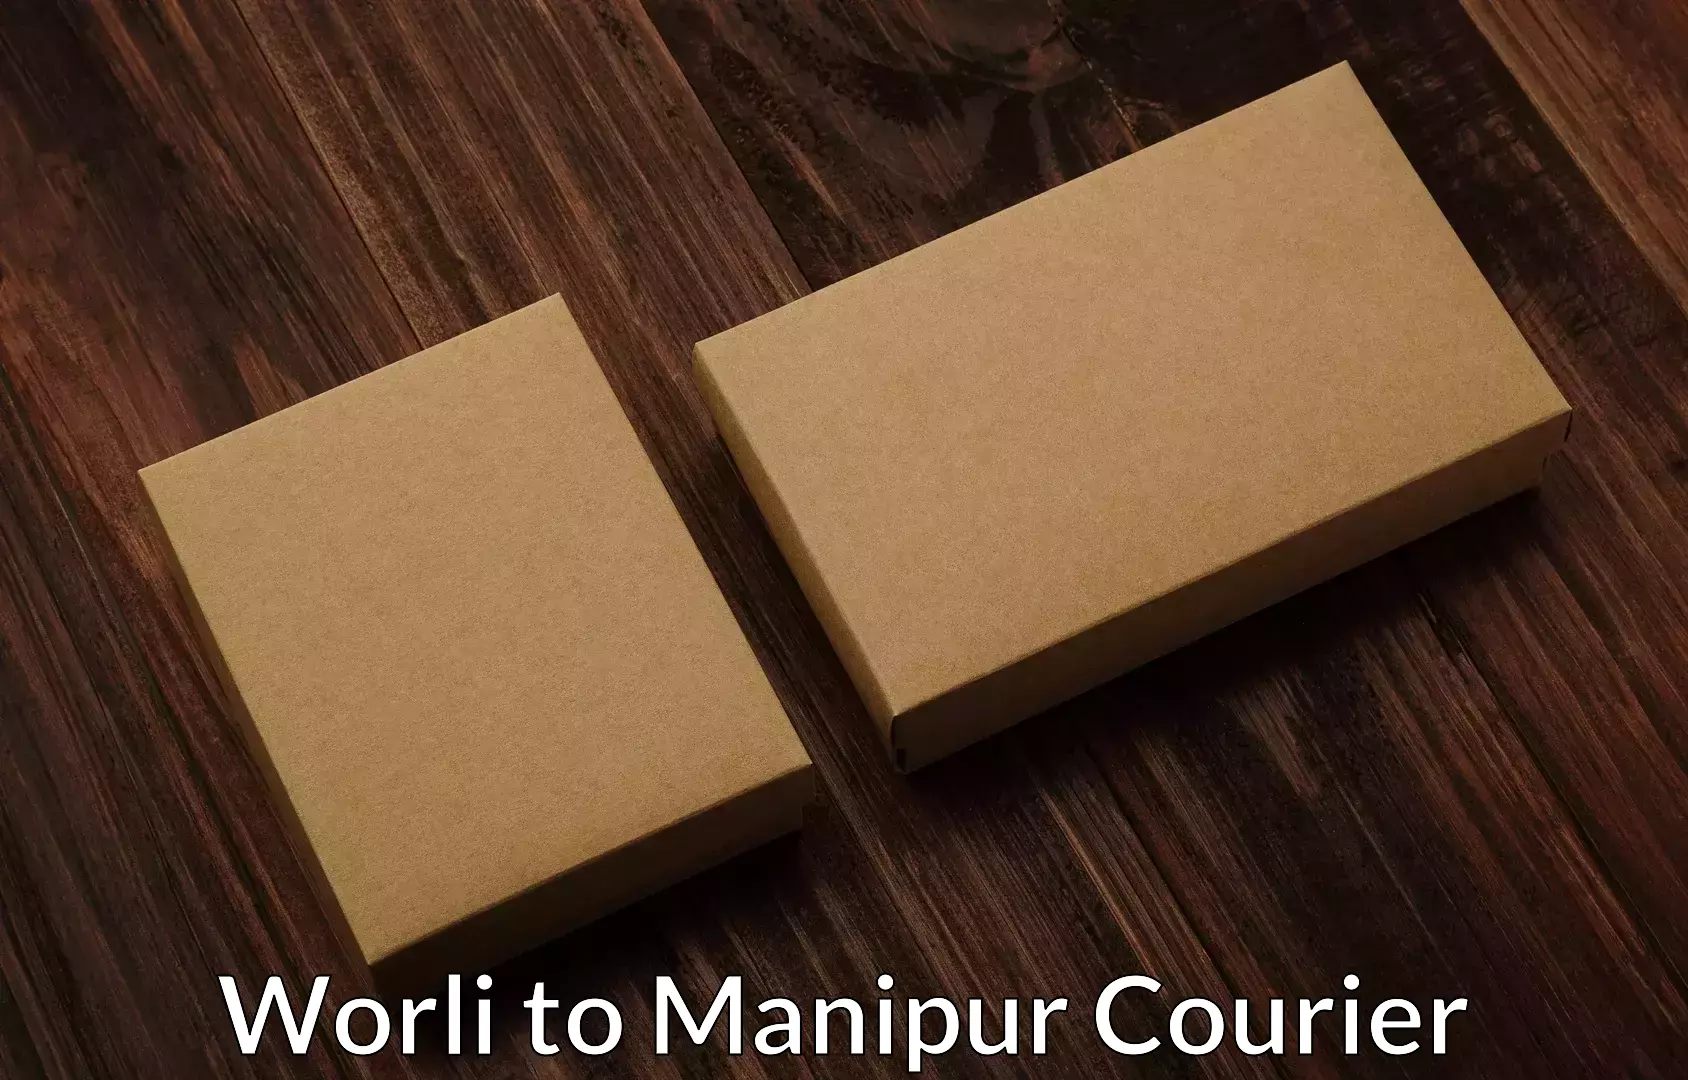 Home goods moving company Worli to Manipur